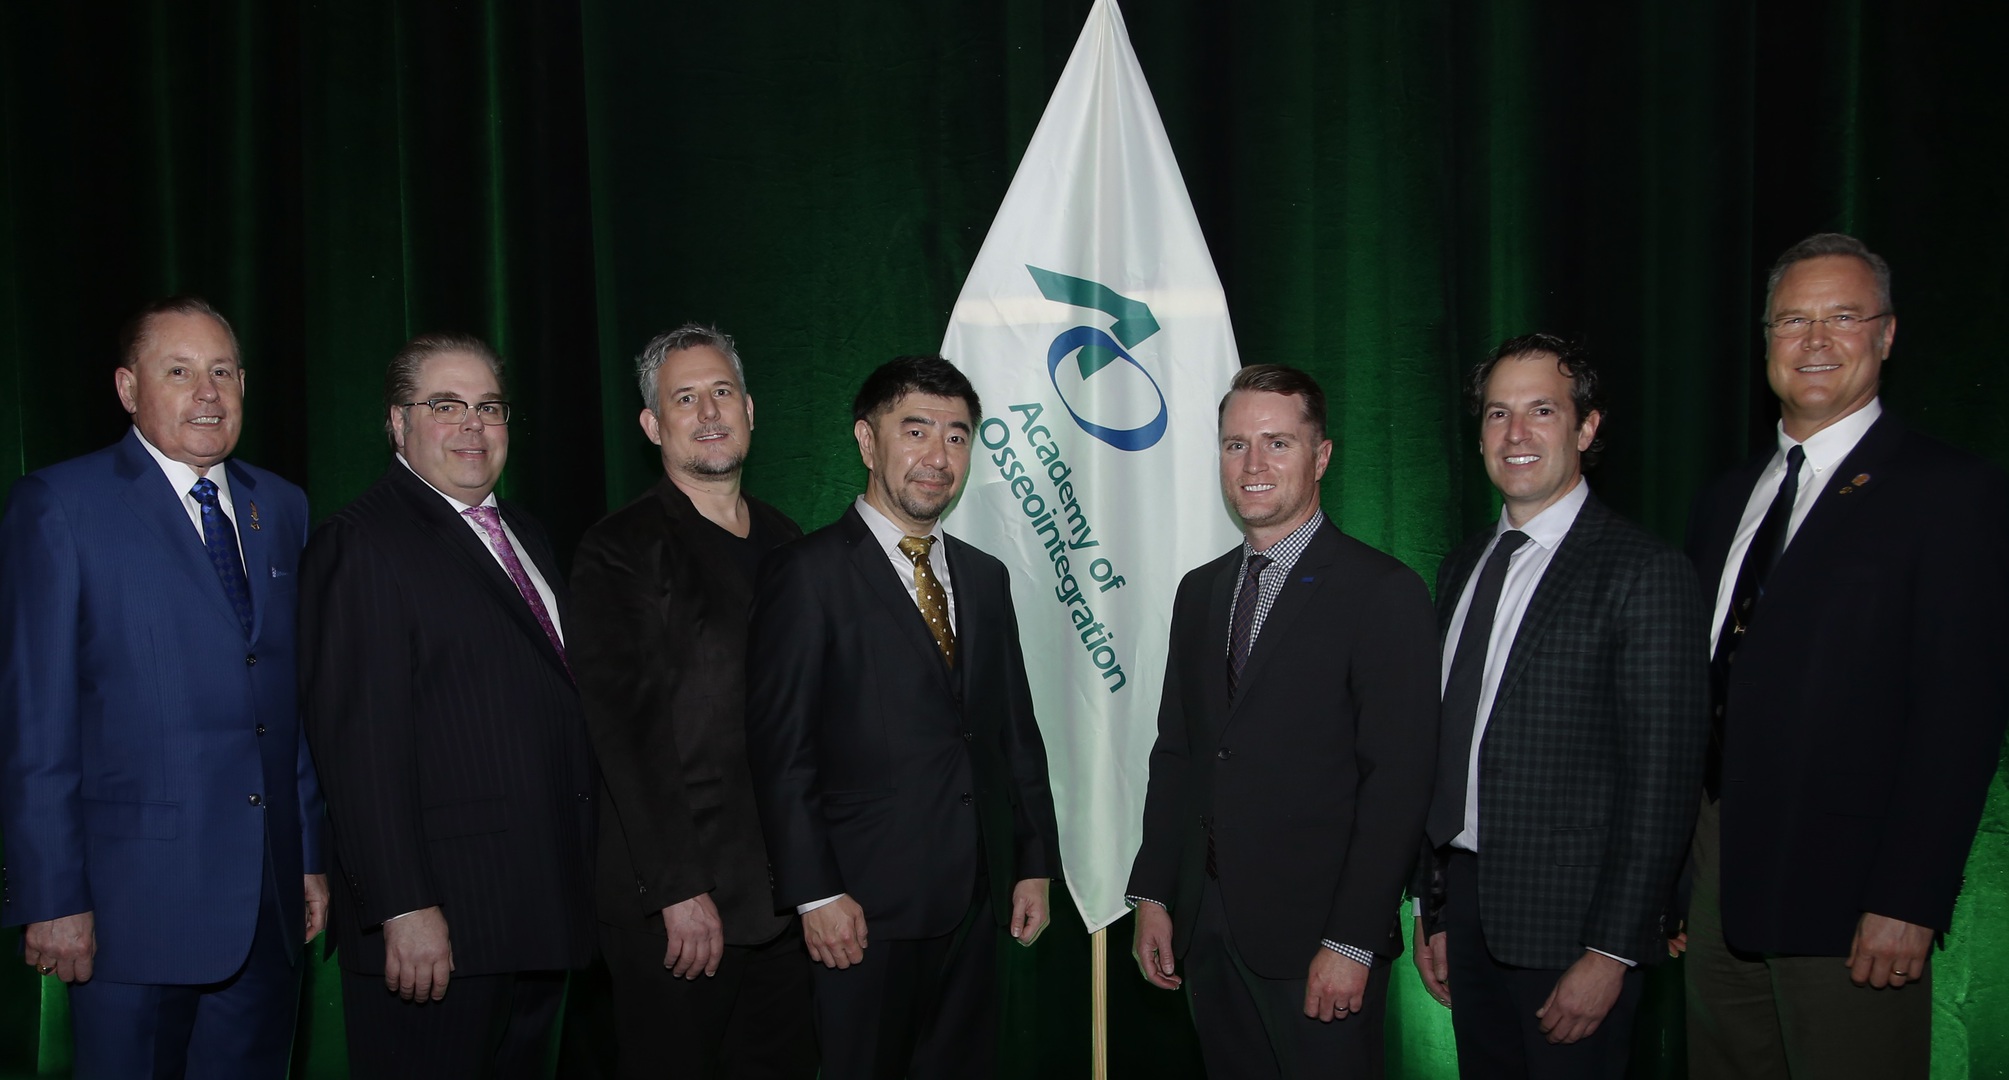 Five achieve AO Fellowships status in the Academy of Osseointegration